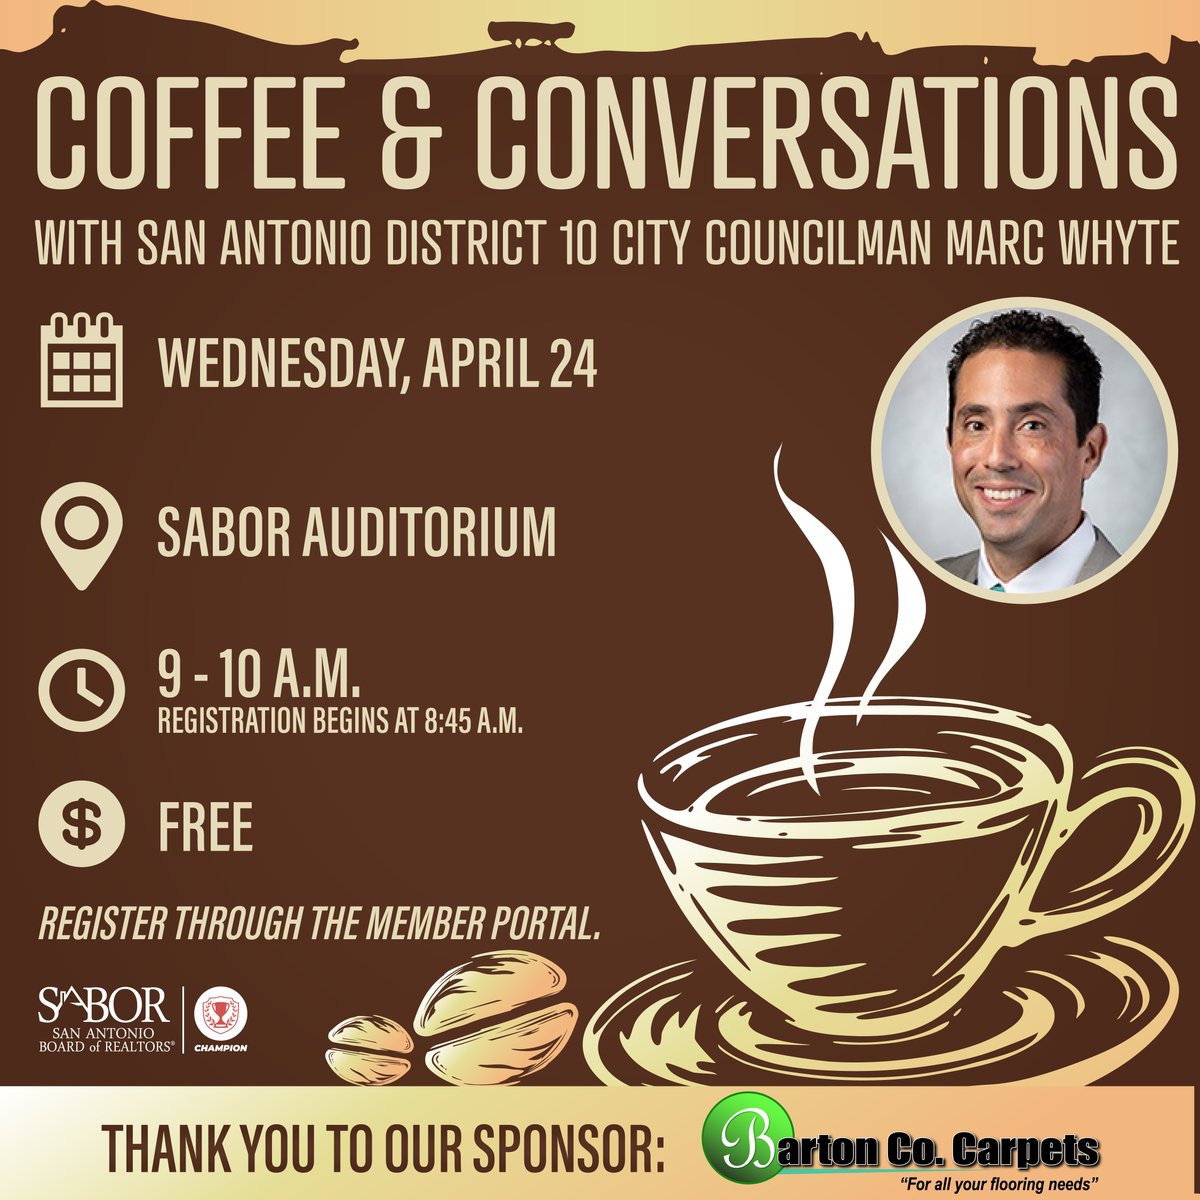 Just a few days away! Join us for 'Coffee and Conversations' on Wednesday, April 24 with San Antonio District 10 City Councilman Marc Whyte. ☕ This is a great opportunity to network and discuss local issues affecting the real estate industry. Register: bit.ly/3TEiOWx